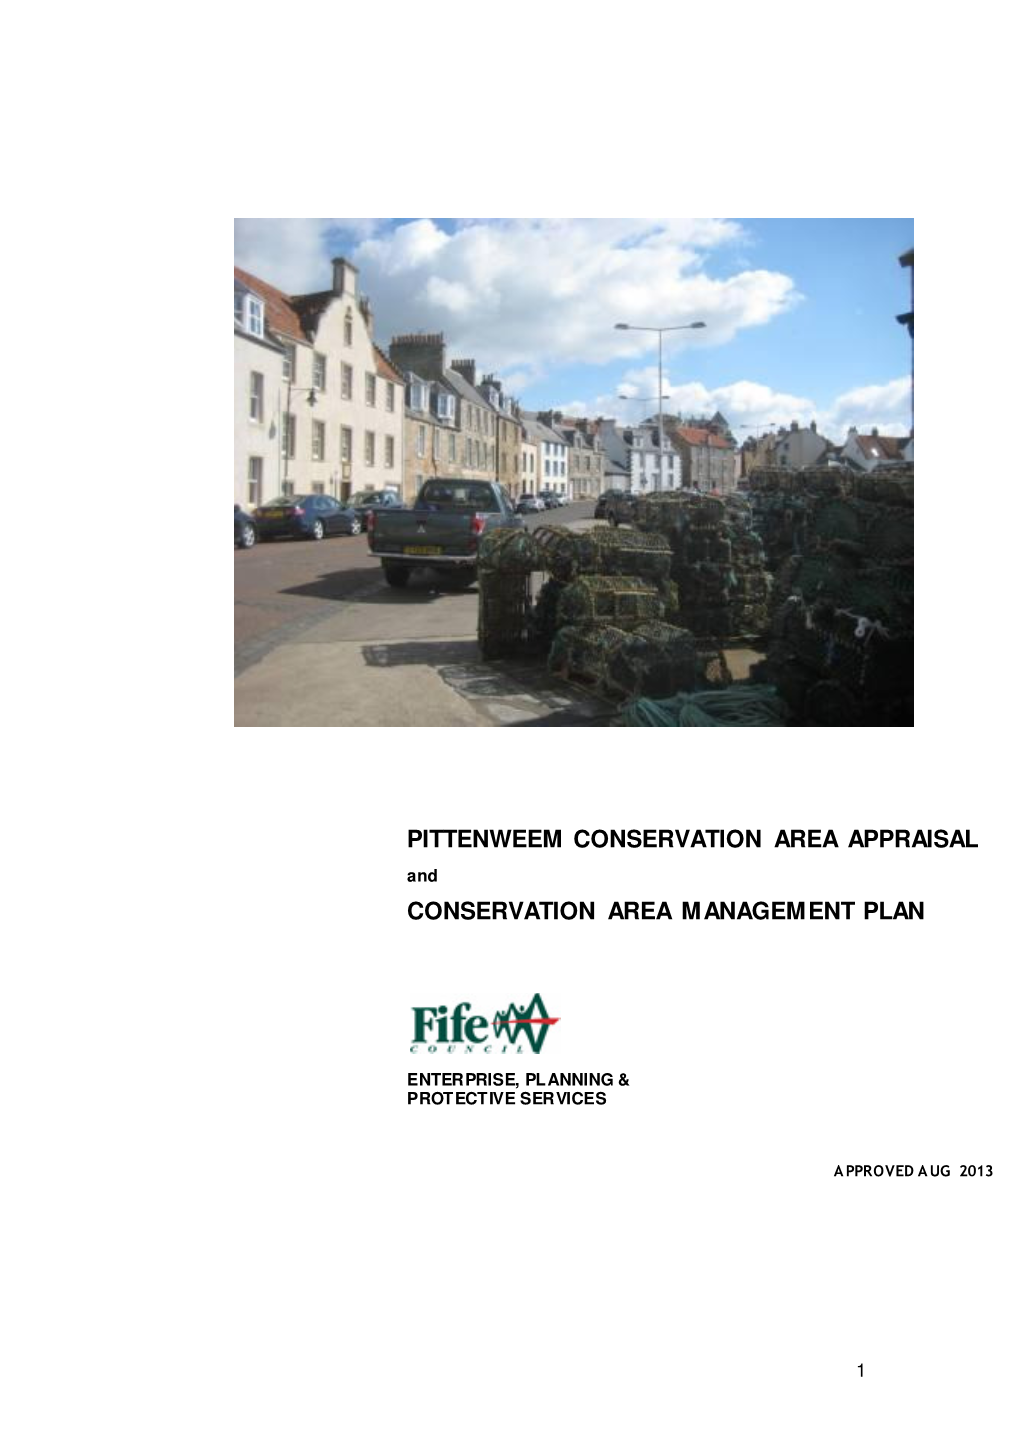 PITTENWEEM CONSERVATION AREA APPRAISAL and CONSERVATION AREA MANAGEMENT PLAN